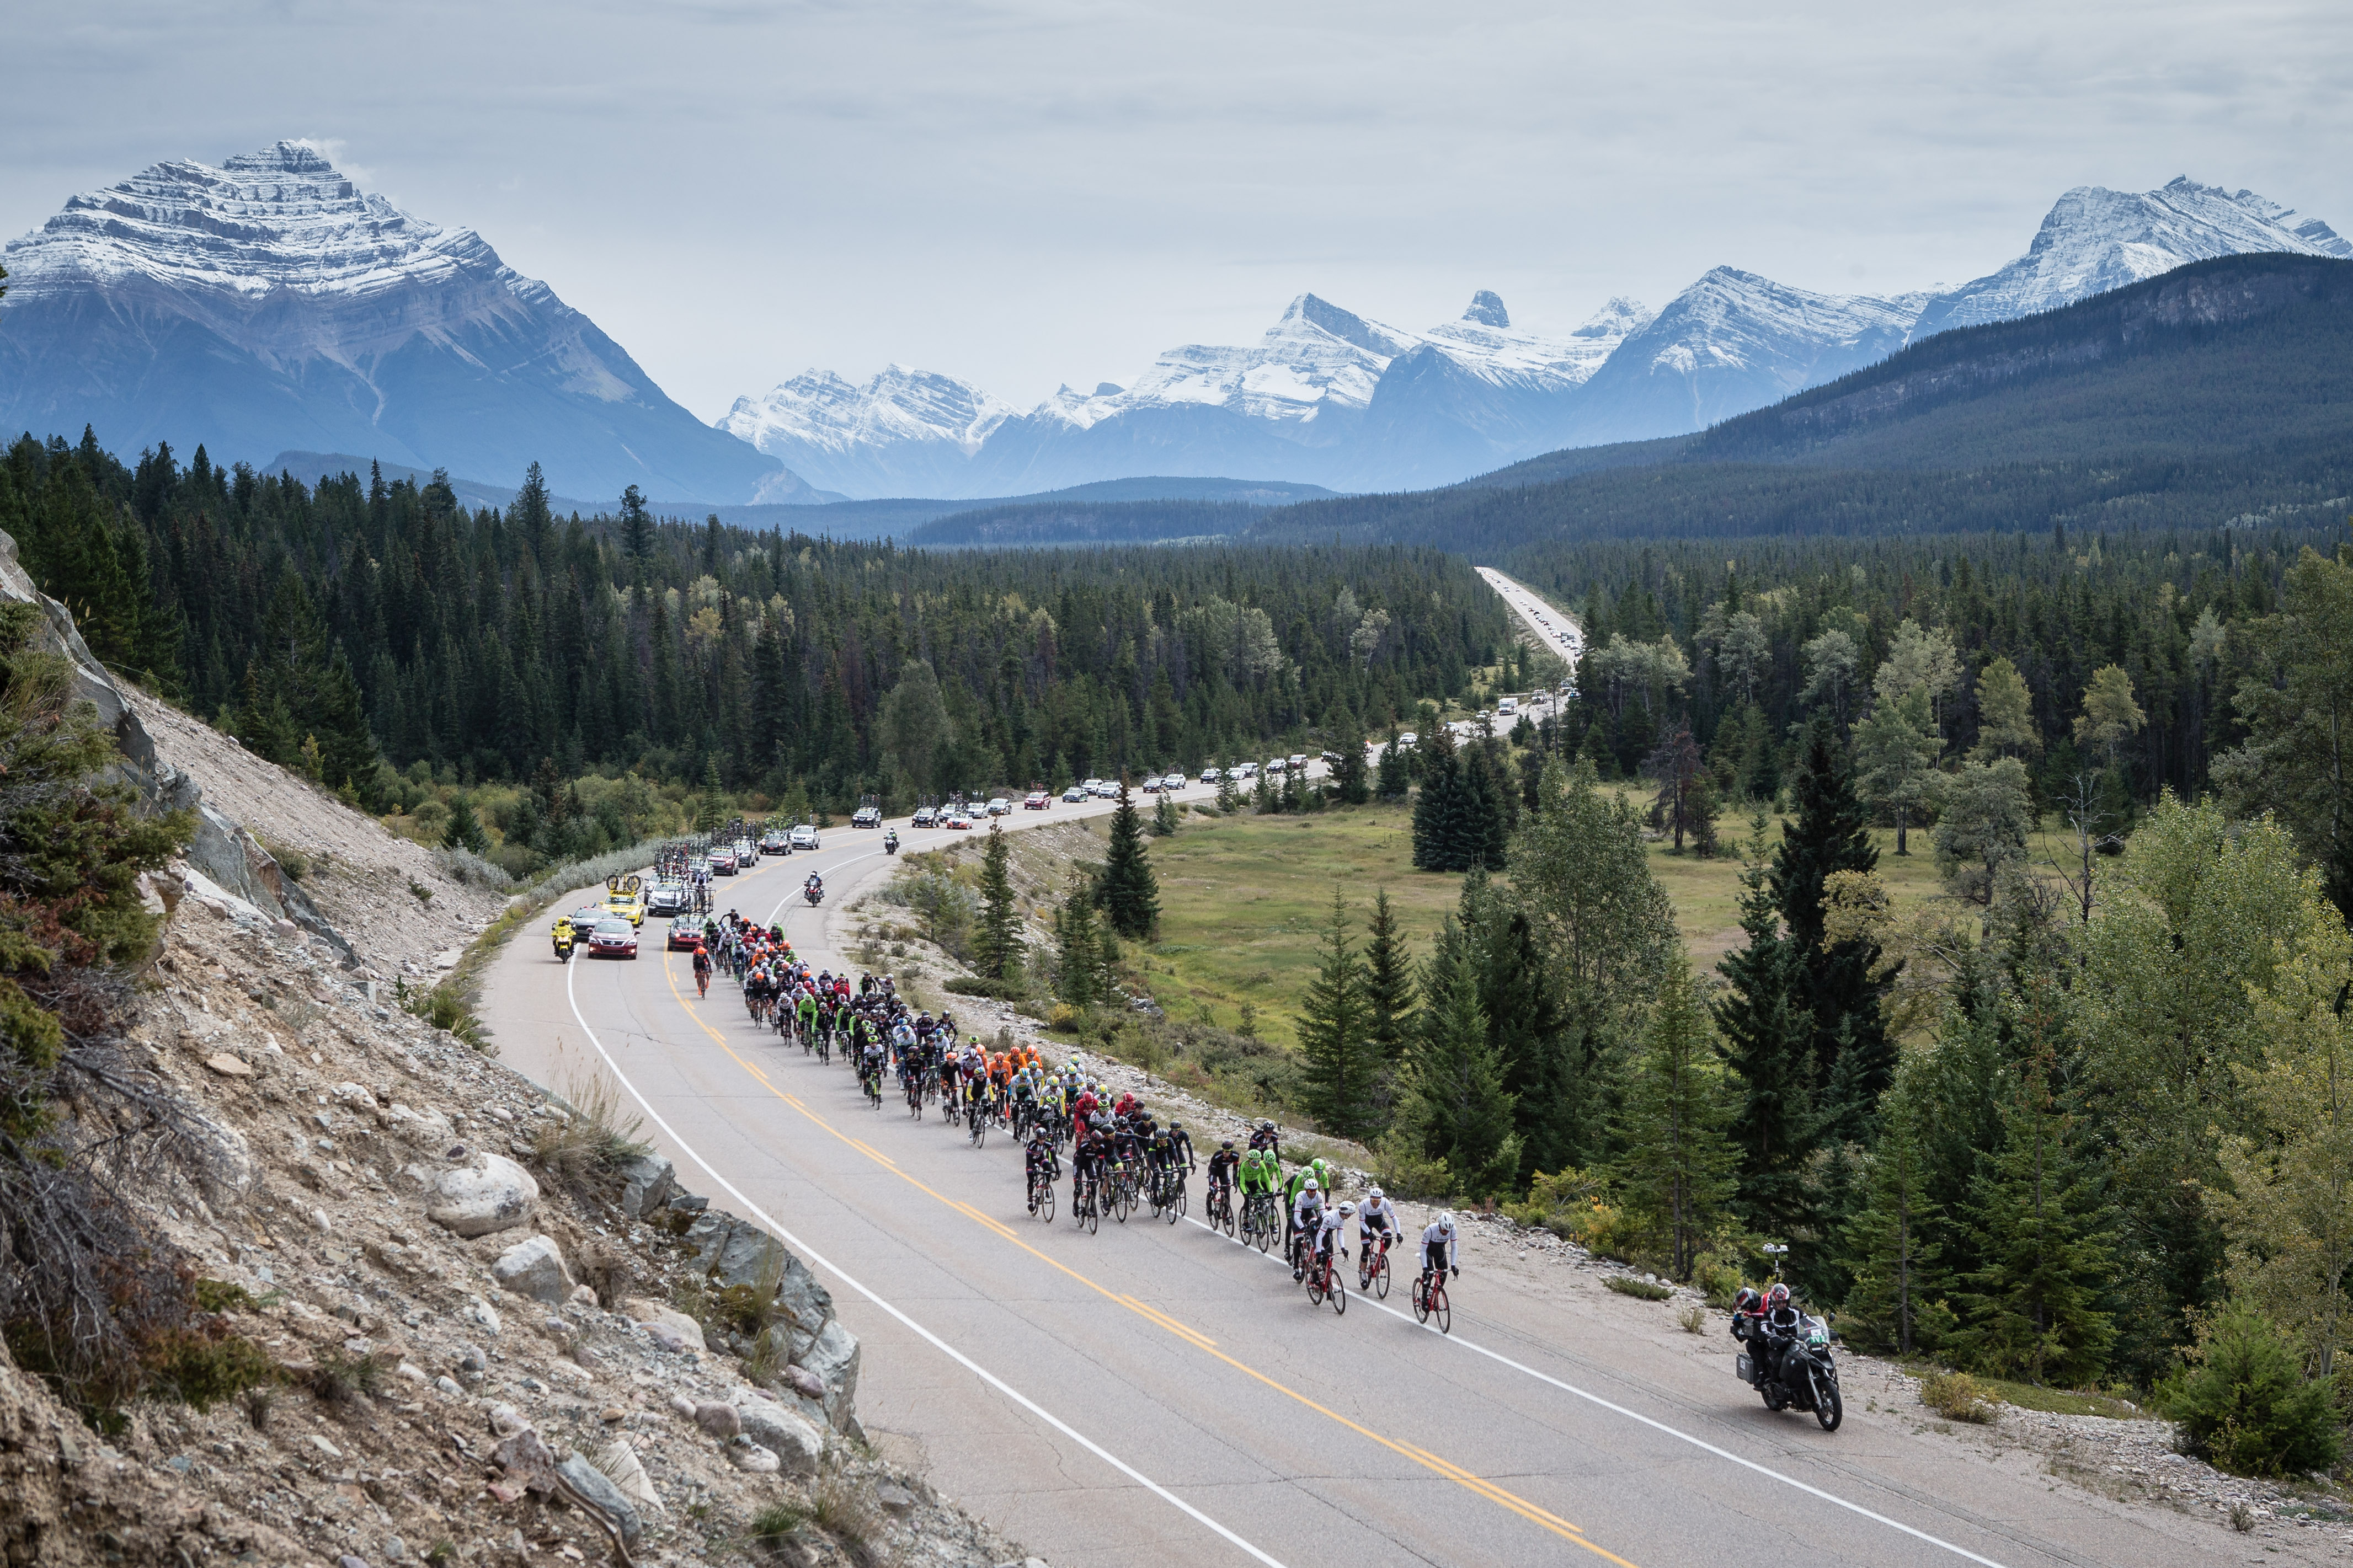 ATB Tour of Alberta Announces Diversity of Courses for 5th Edition, September 1 – 4, 2017